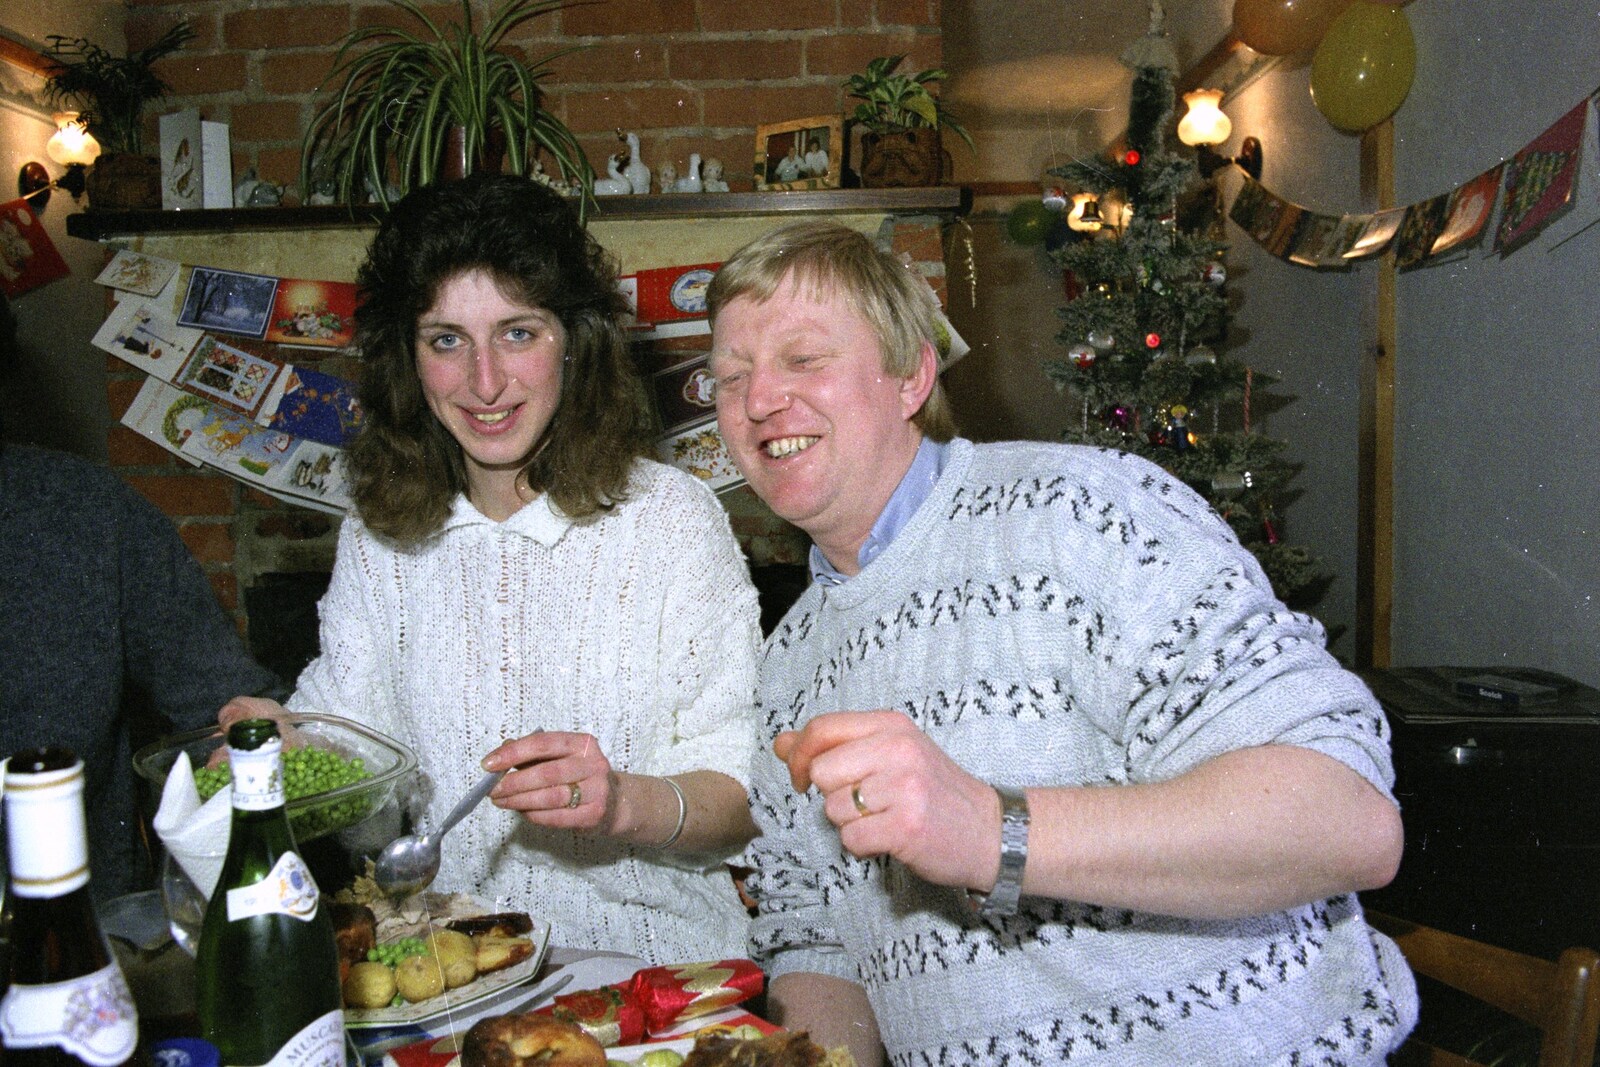 Karen, Alan and a bowl of peas from Late Night, and Christmas with the Coxes, Needham, Norfolk - 25th December 1989